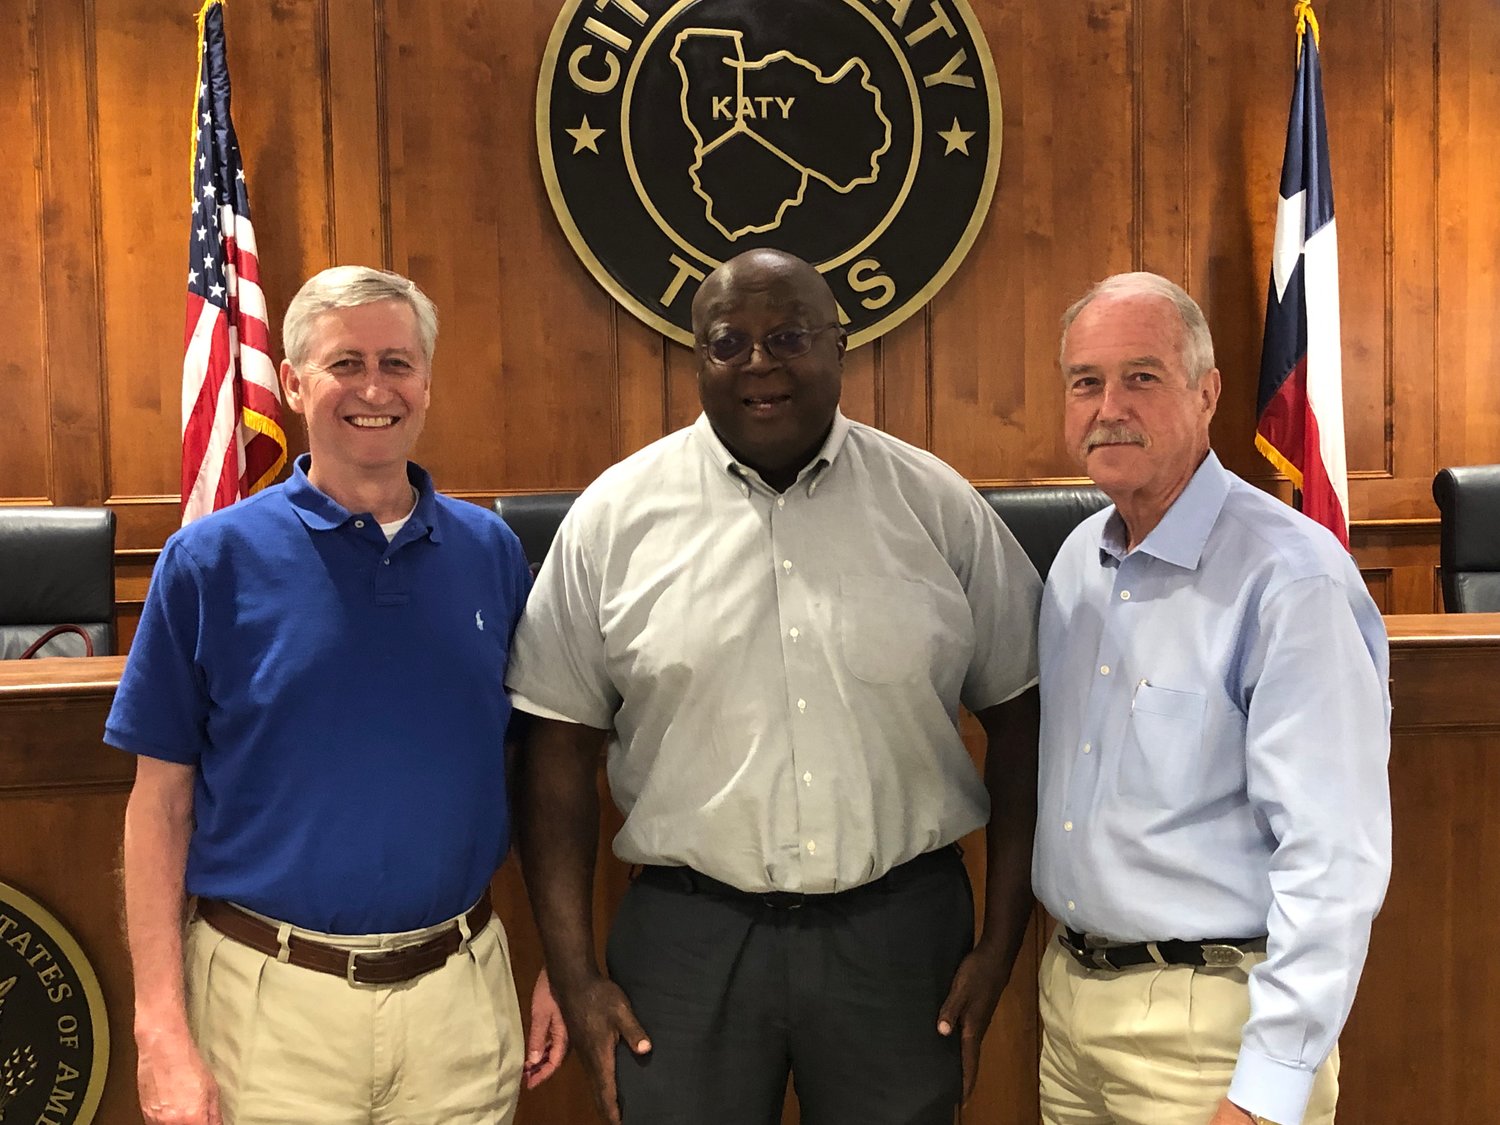 Mayor-Elect Dusty Thiele, City Attorney Art Pertile, and Mayor Bill Hastings pose together following Monday's Katy City Council meeting at City Hall.